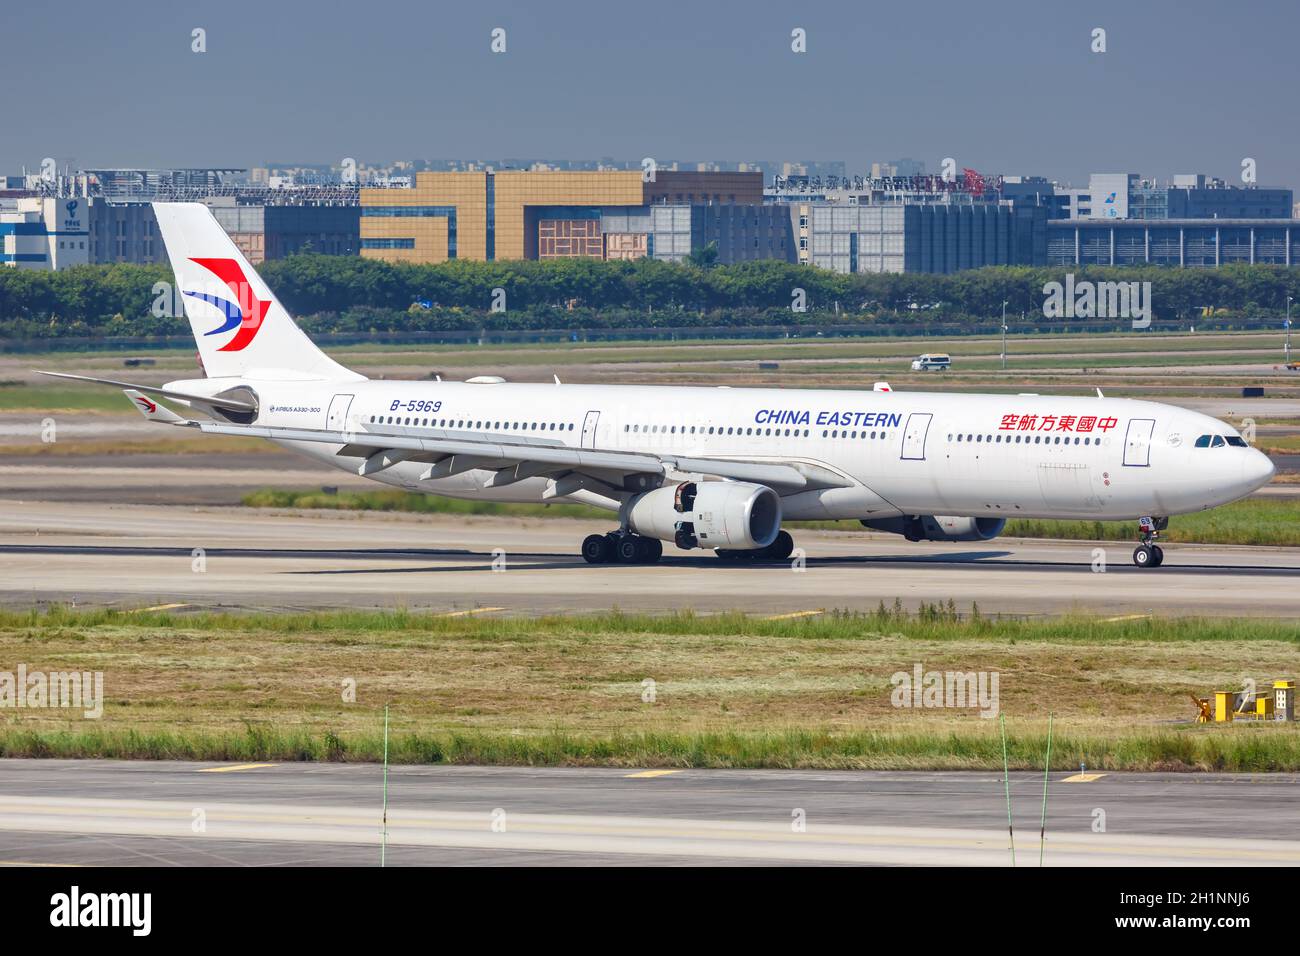 Guangzhou, China - September 24, 2019: China Eastern Airlines Airbus A330-300 airplane at Guangzhou Baiyun Airport (CAN) in China. Stock Photo